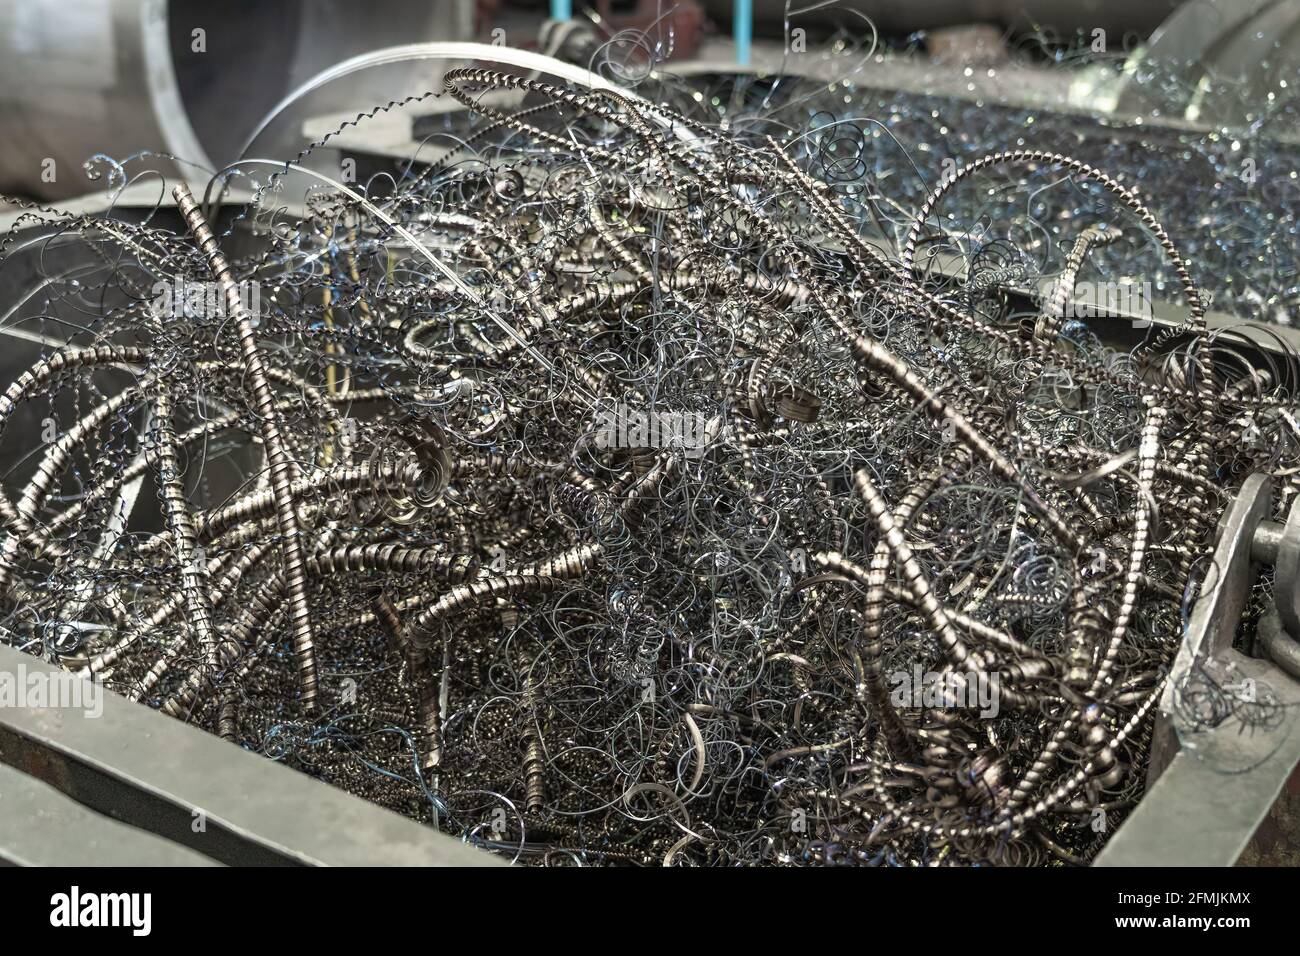 Metal shavings or scrap metal waste steel for recycling in container in factory. Stock Photo